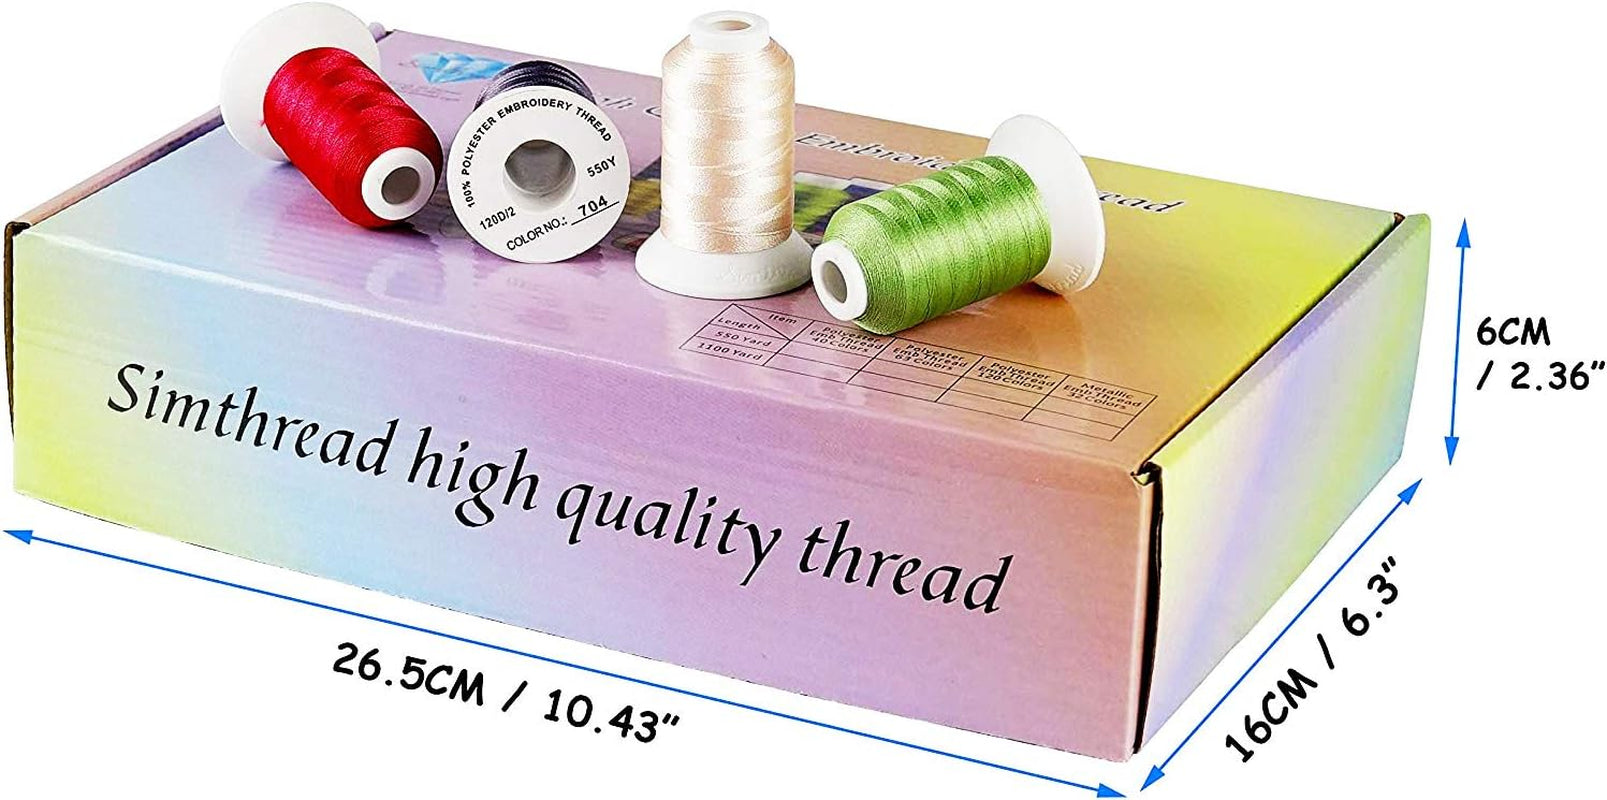 Brother 40 Colors 40 Weight Polyester Embroidery Machine Thread Kit 550Y(500M) for Brother Babylock Janome Singer Husqvarna Bernina Embroidery and Sewing Machines